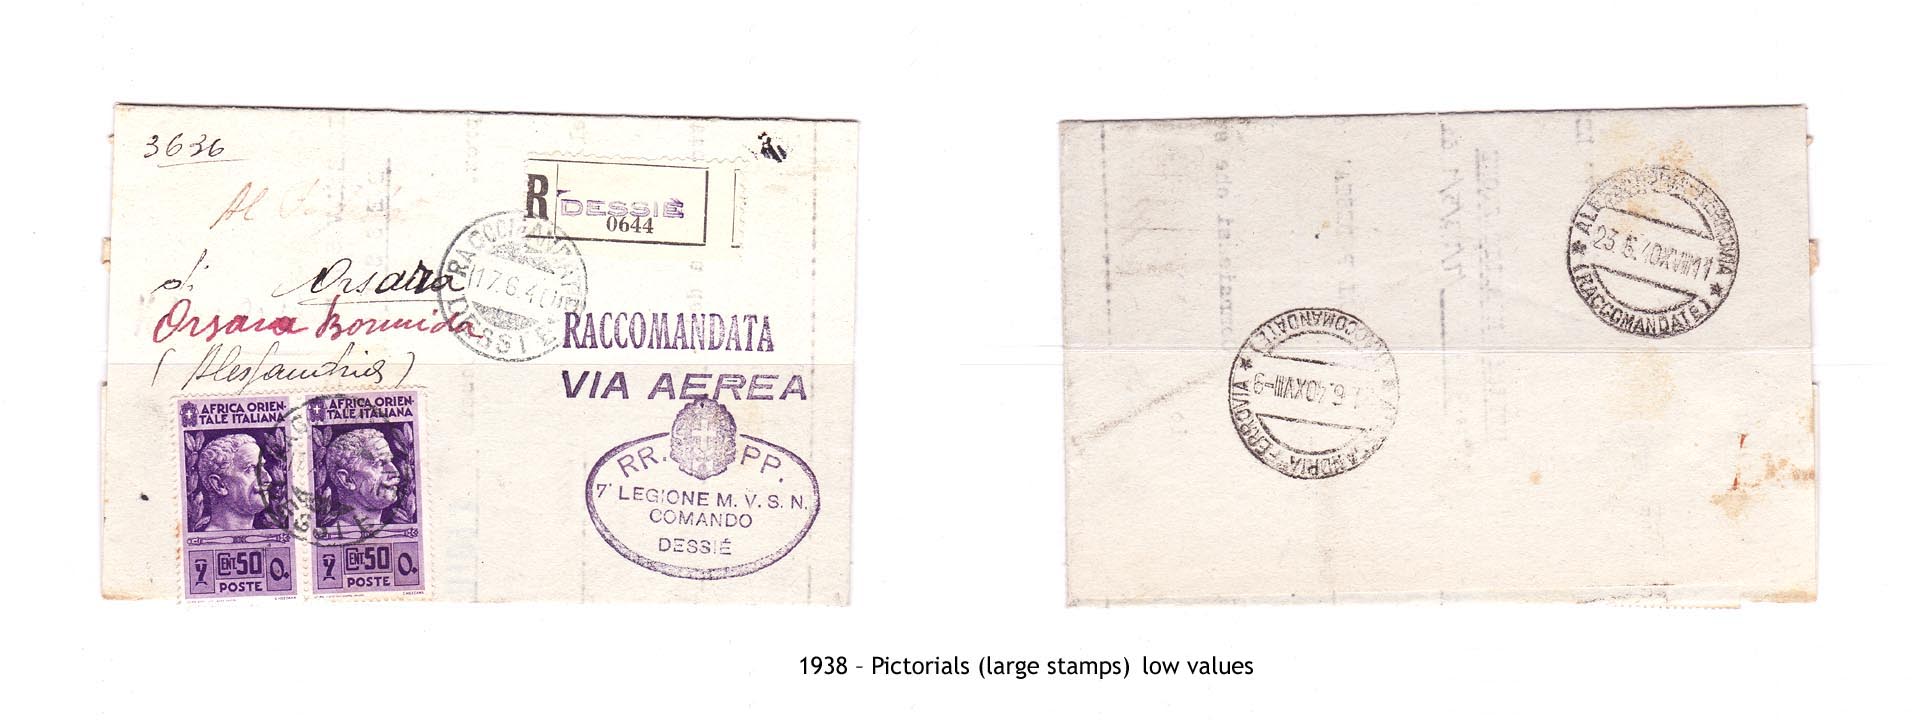 1938 – AOI Pictorials (large stamps) low values